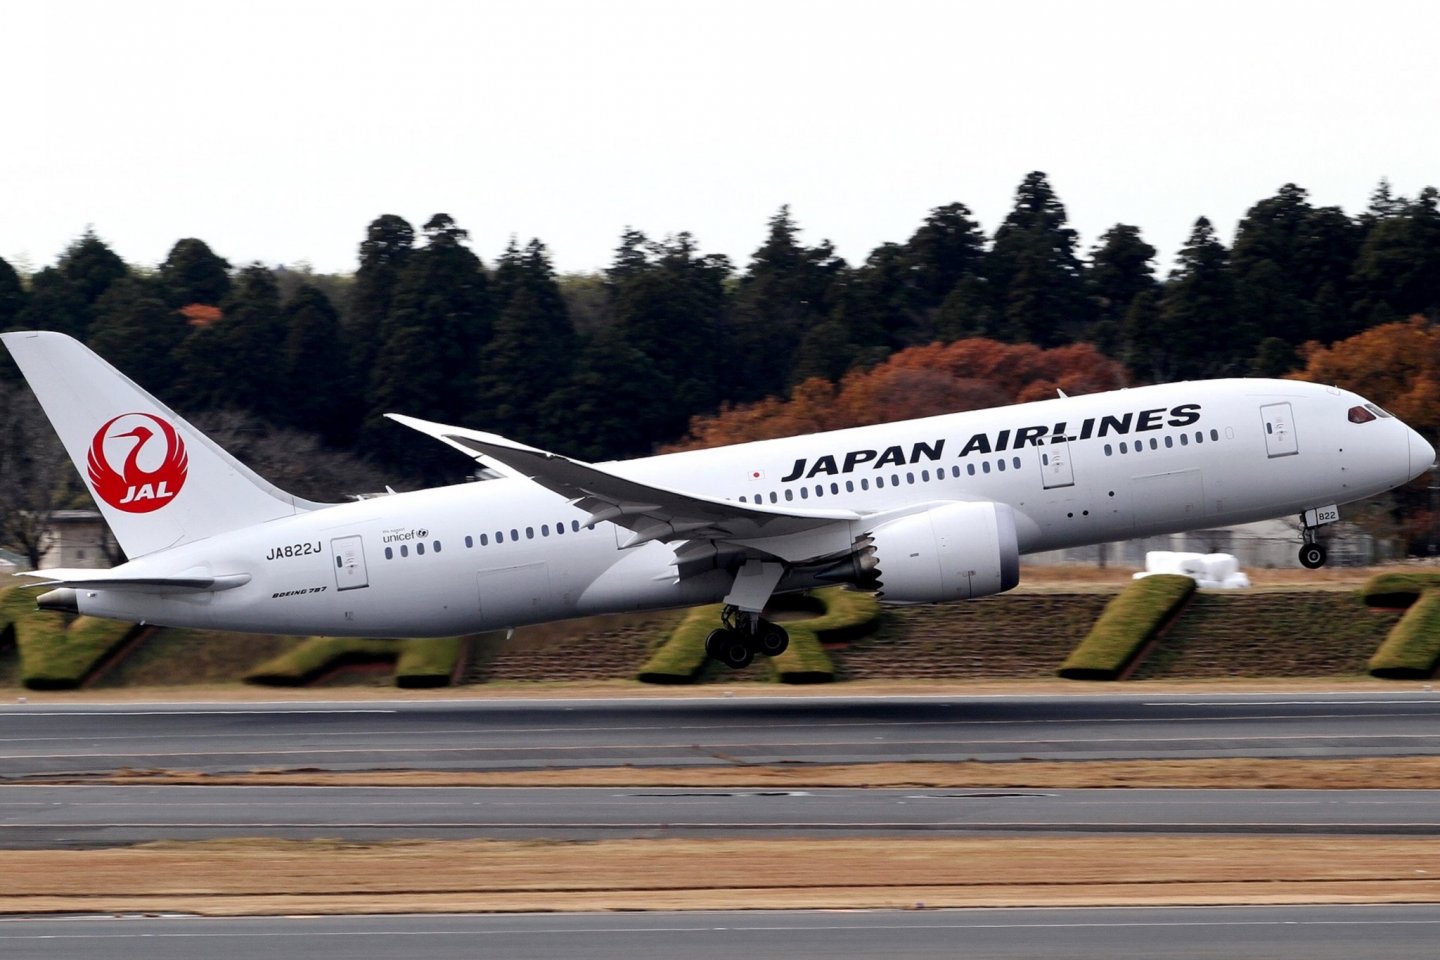 Japan Airlines to fly Boeing 787 Dreamliners between Melbourne and Tokyo Narita